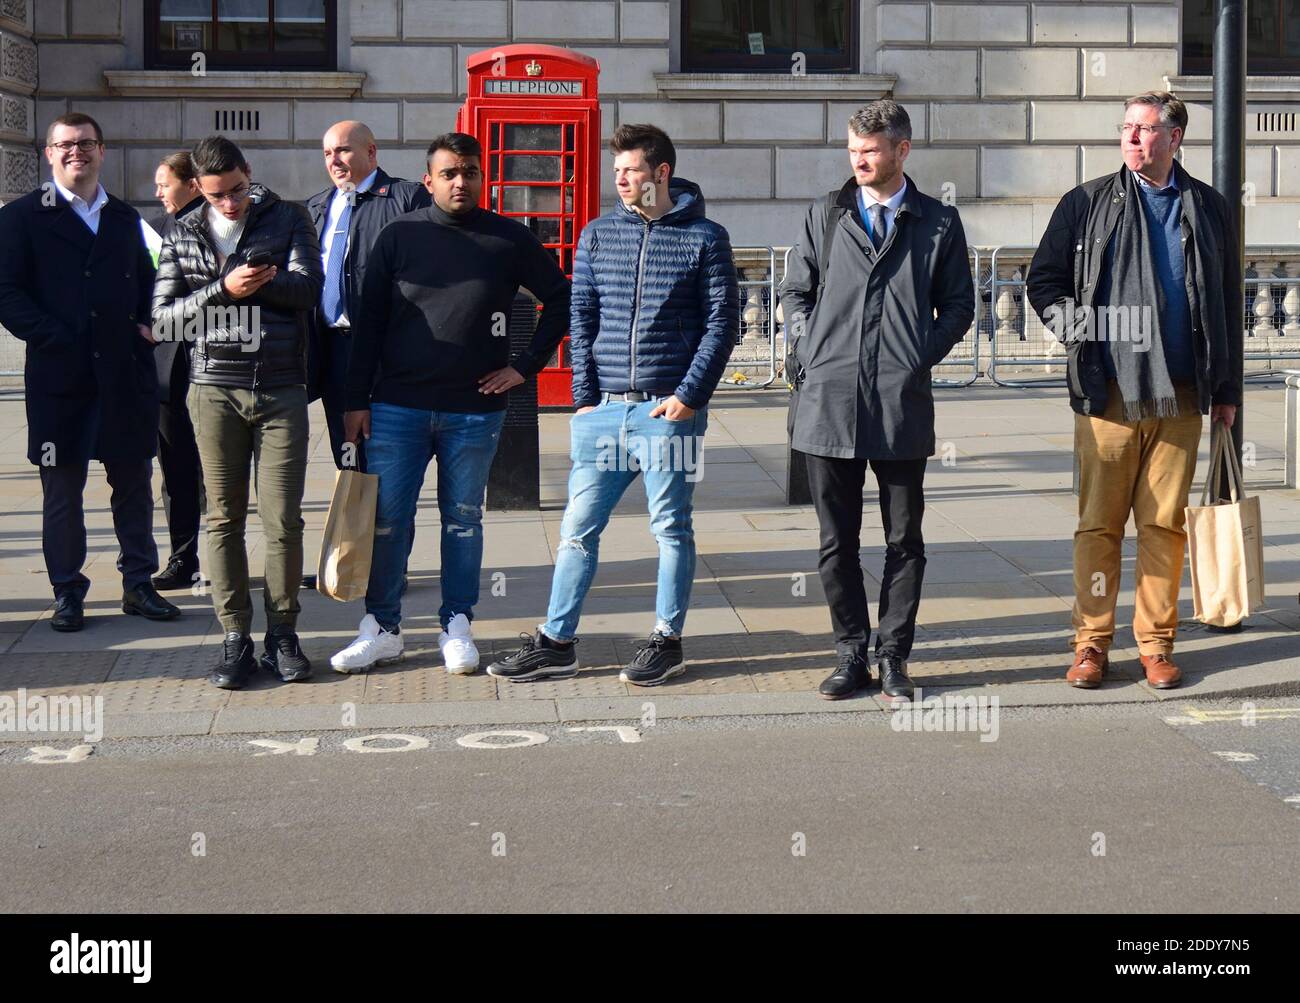 Sir Graham Brady MP [far right] (Con: Altrincham and Sale West) chairman of the 1922 Committee waiting to cross the road in Whitehall Stock Photo